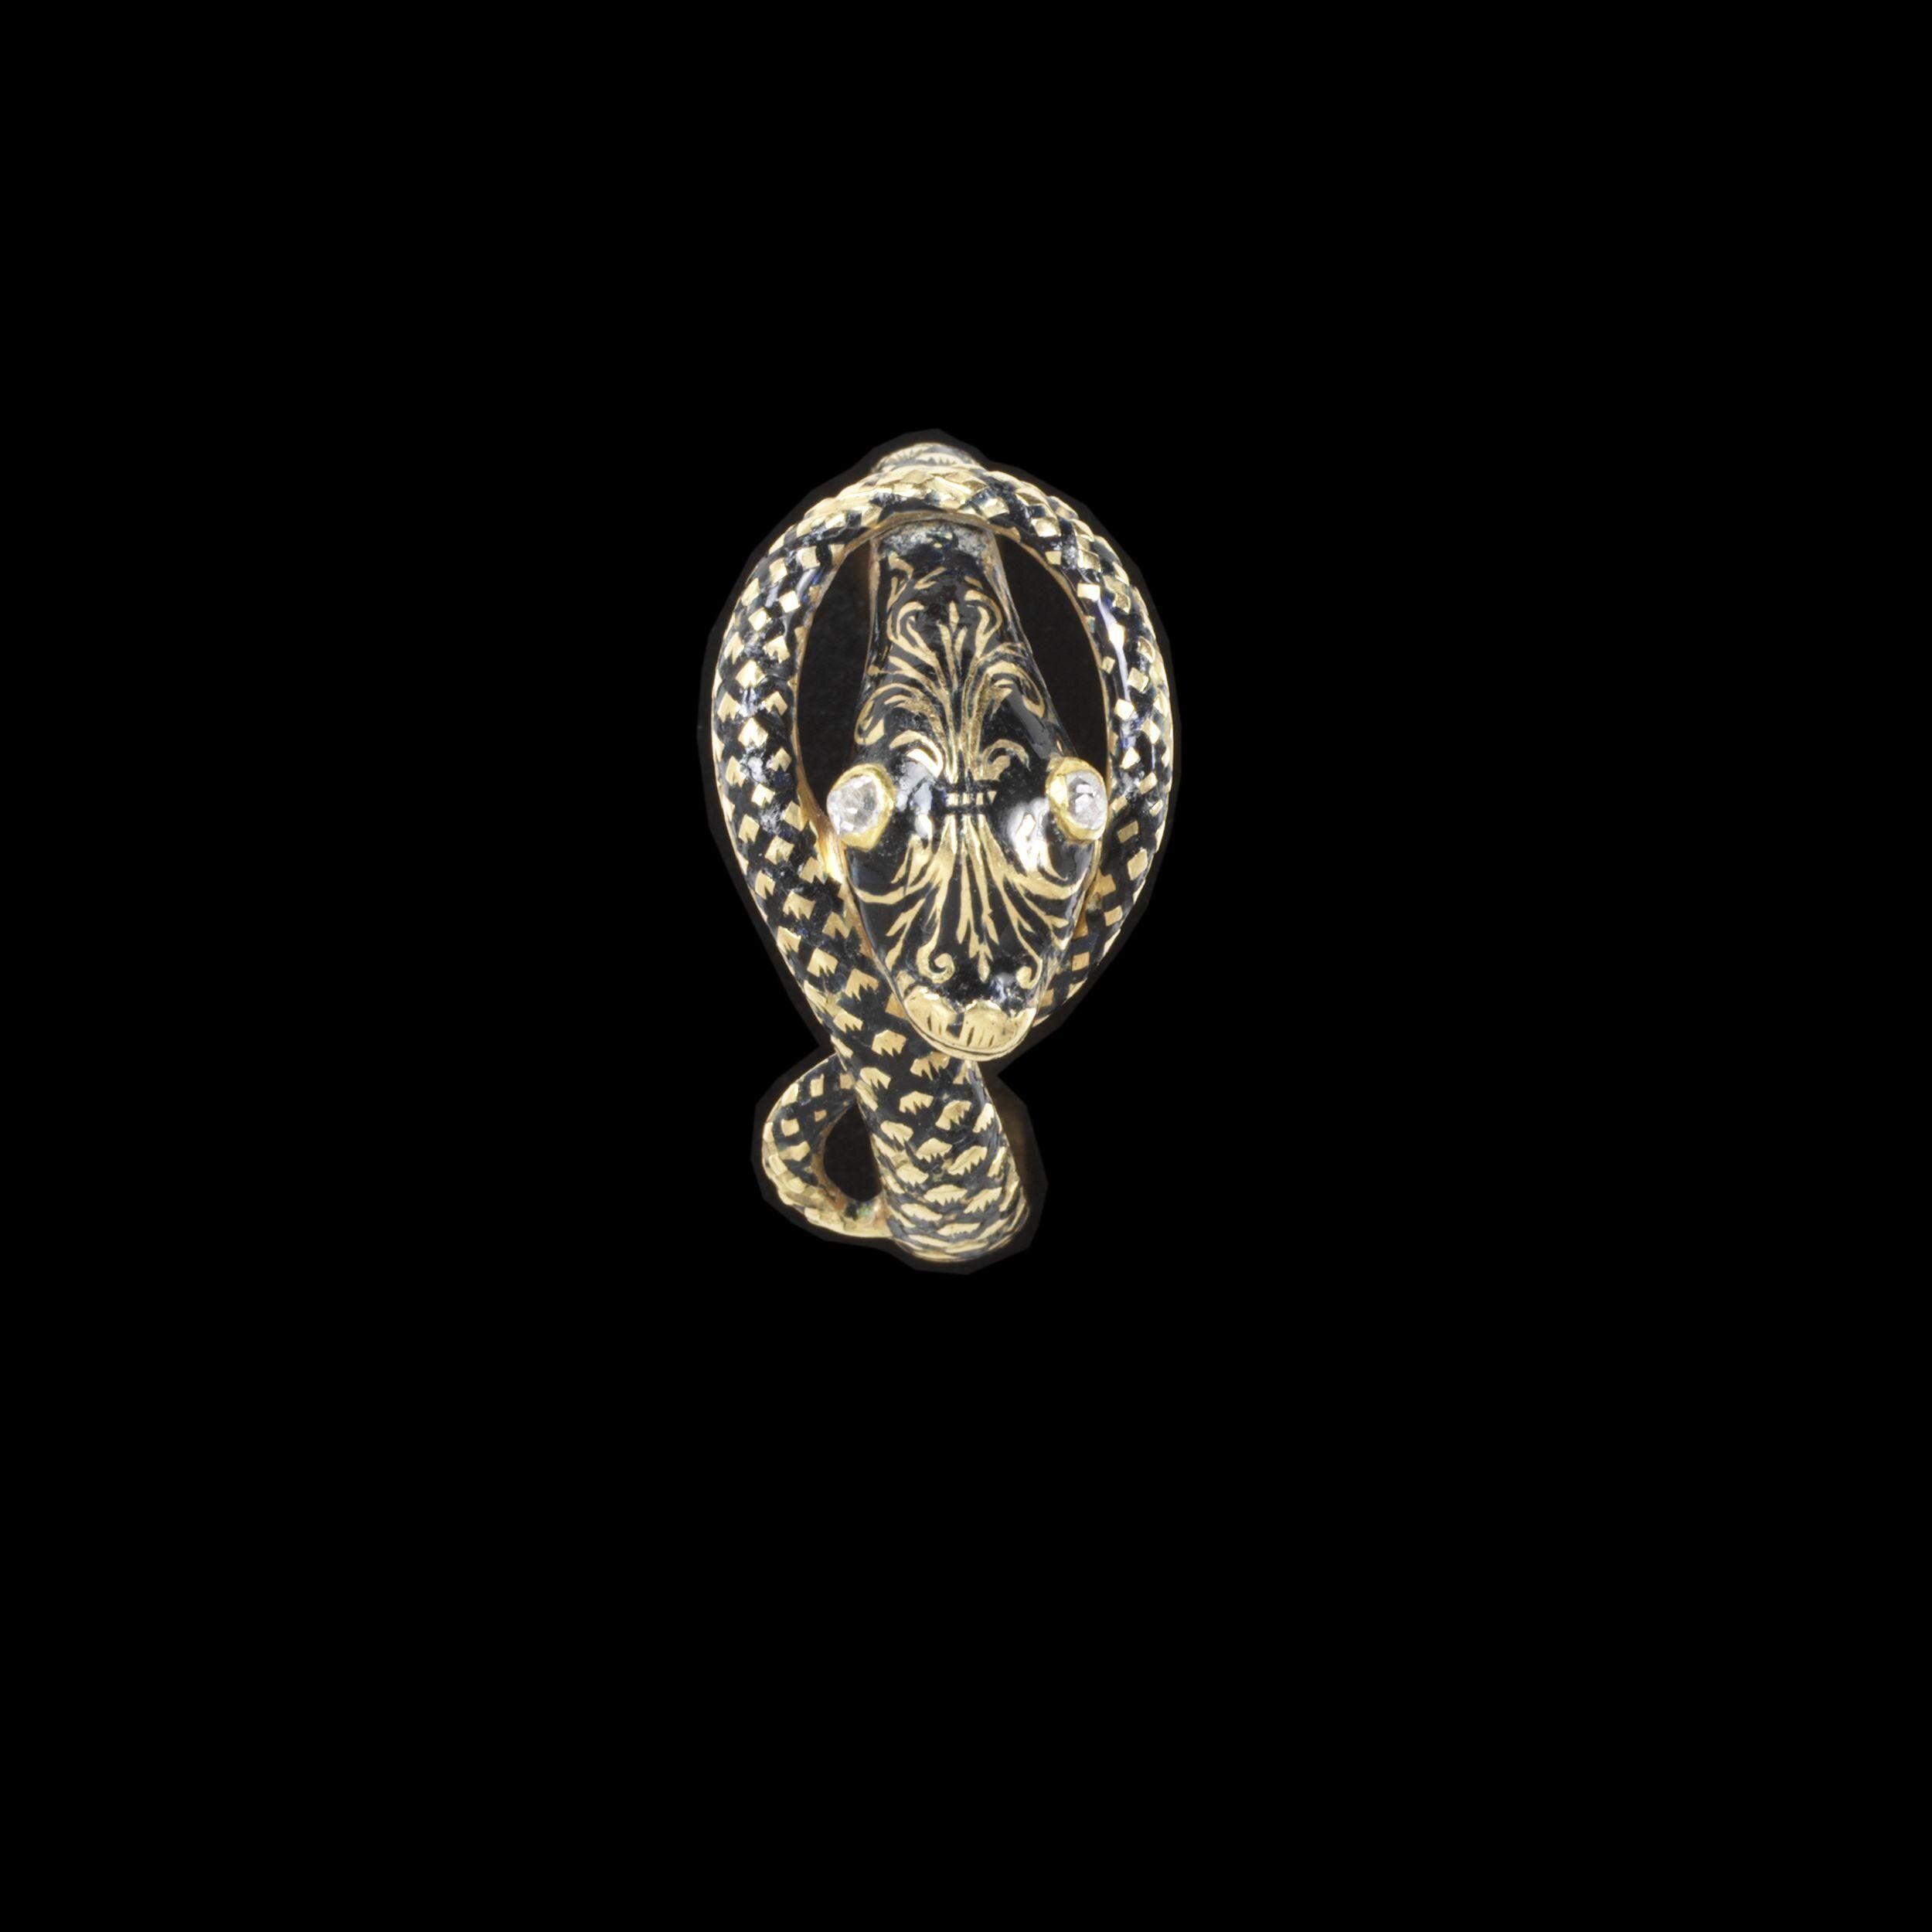 snake mourning ring, 1846, Victoria and Albert Museum